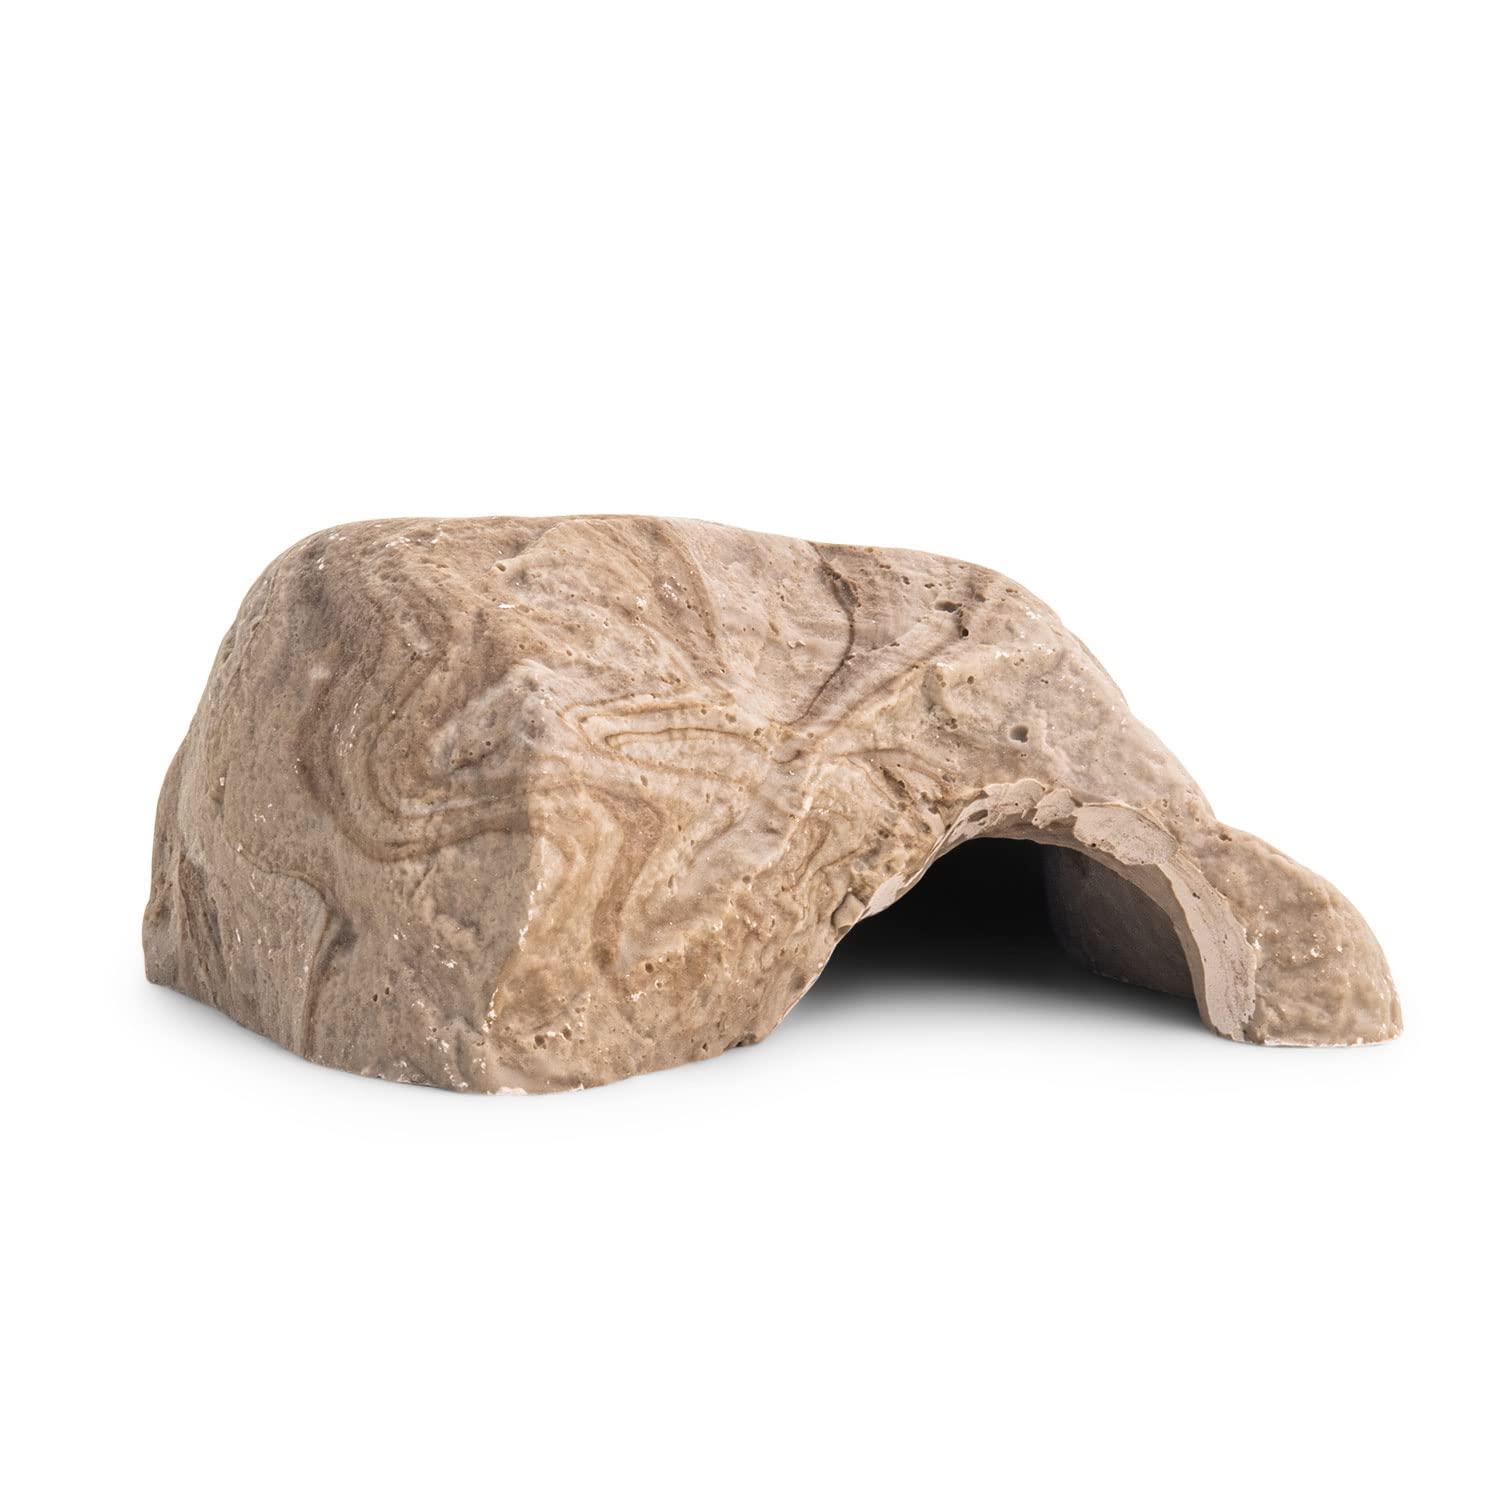 Flukers Reptile Rock cave - Natural Looking Rock cave for all Reptiles, Amphibians and Arachnids, Large